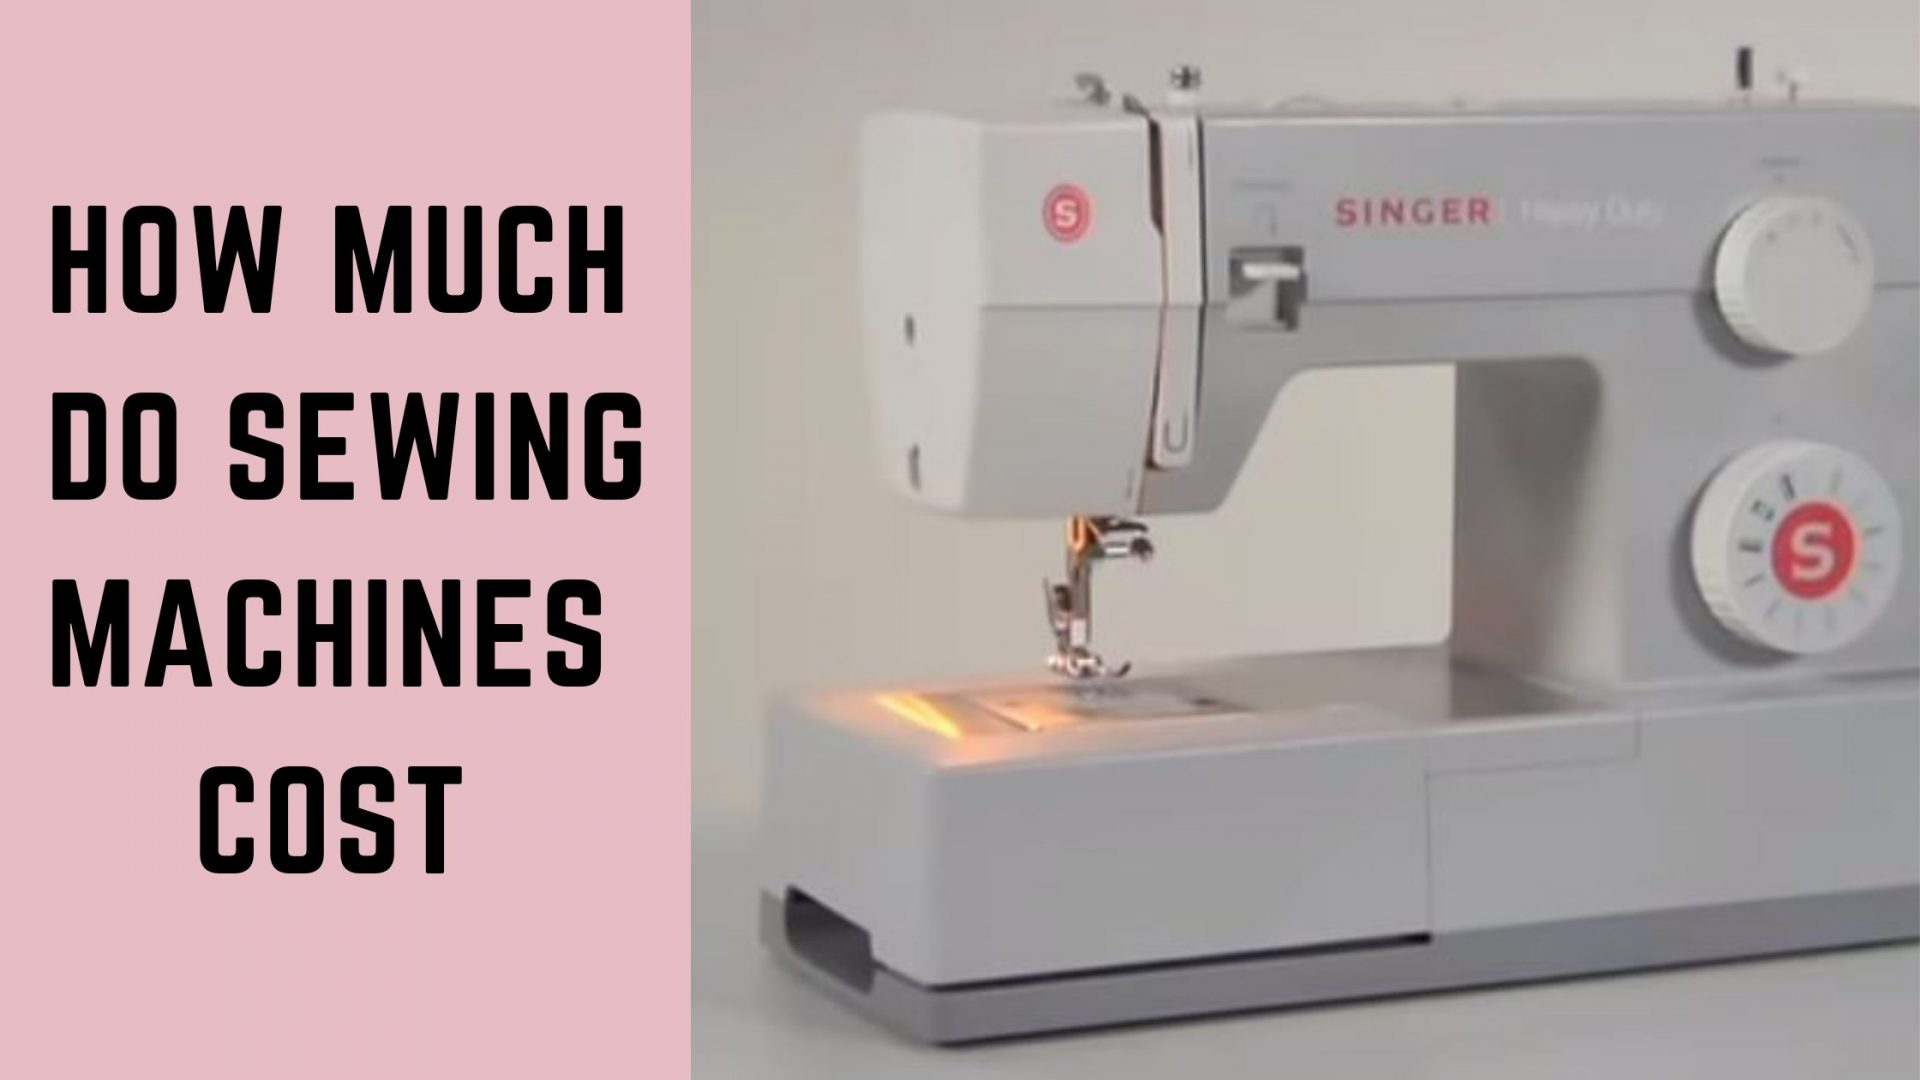 How Much Do Sewing Machines Cost